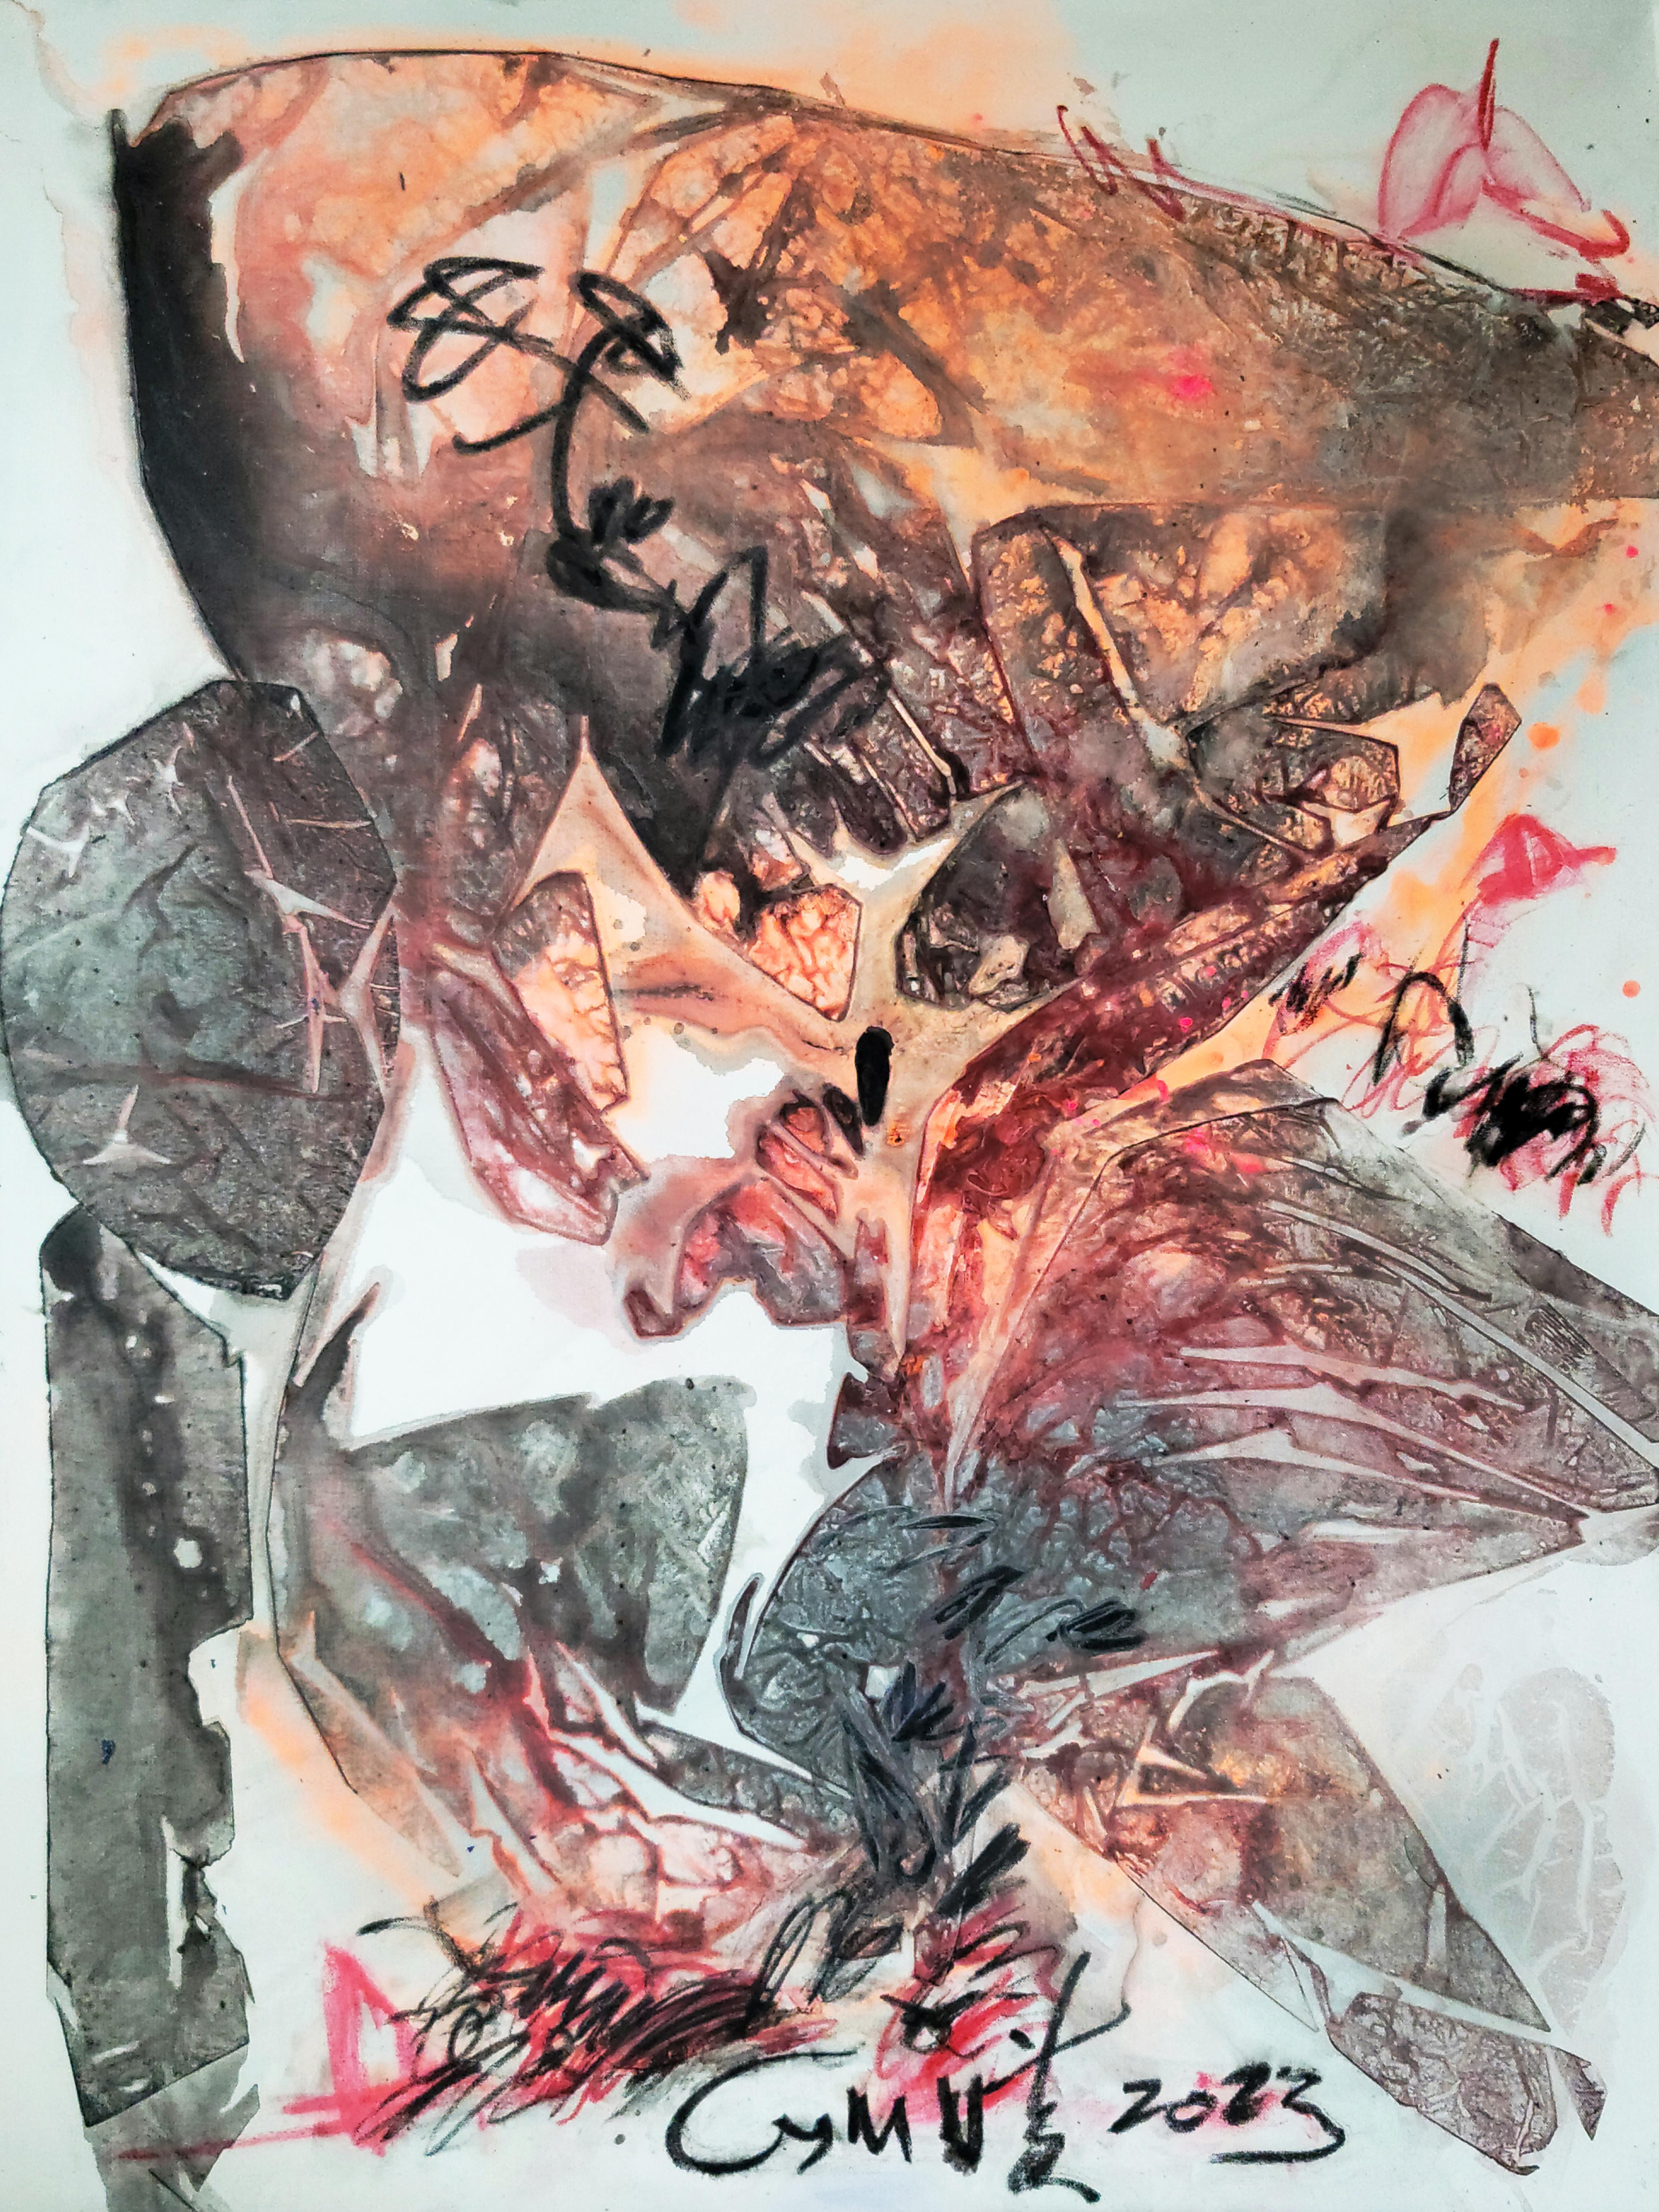 Simultaneous Evolution- Gestural, Expressive Abstract, Zen Calligraphy - Painting by Cymn Wong 